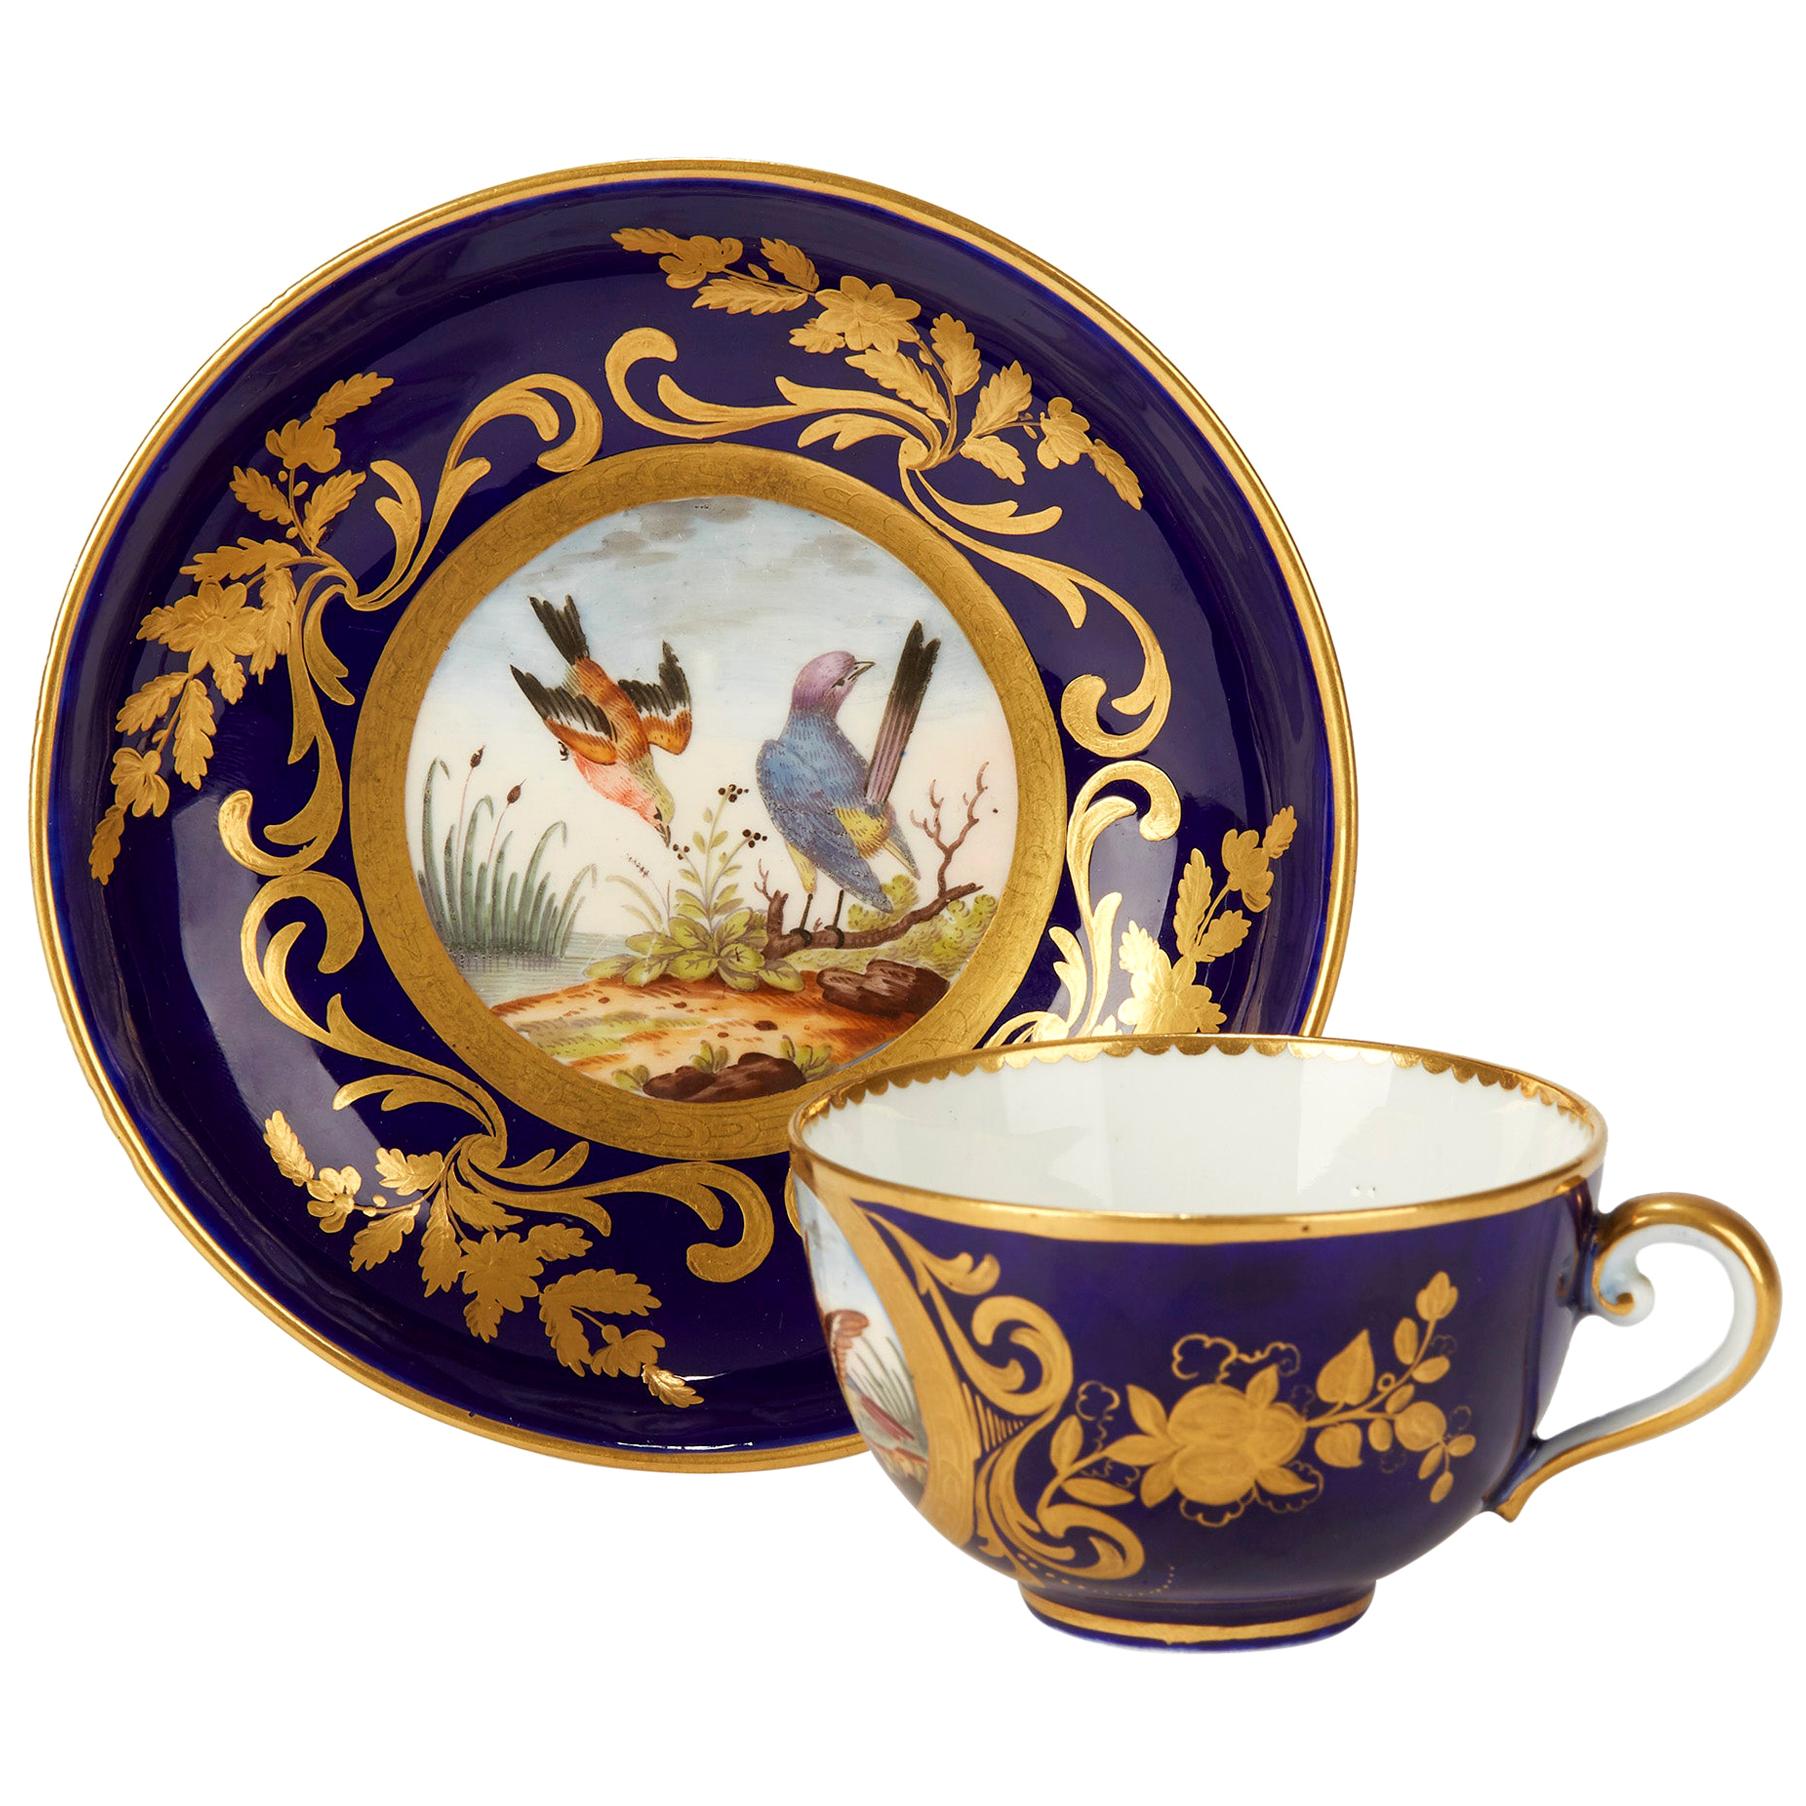 Sèvres French Porcelain Hand Painted Teacup and Saucer with Bird Scenes, 1791